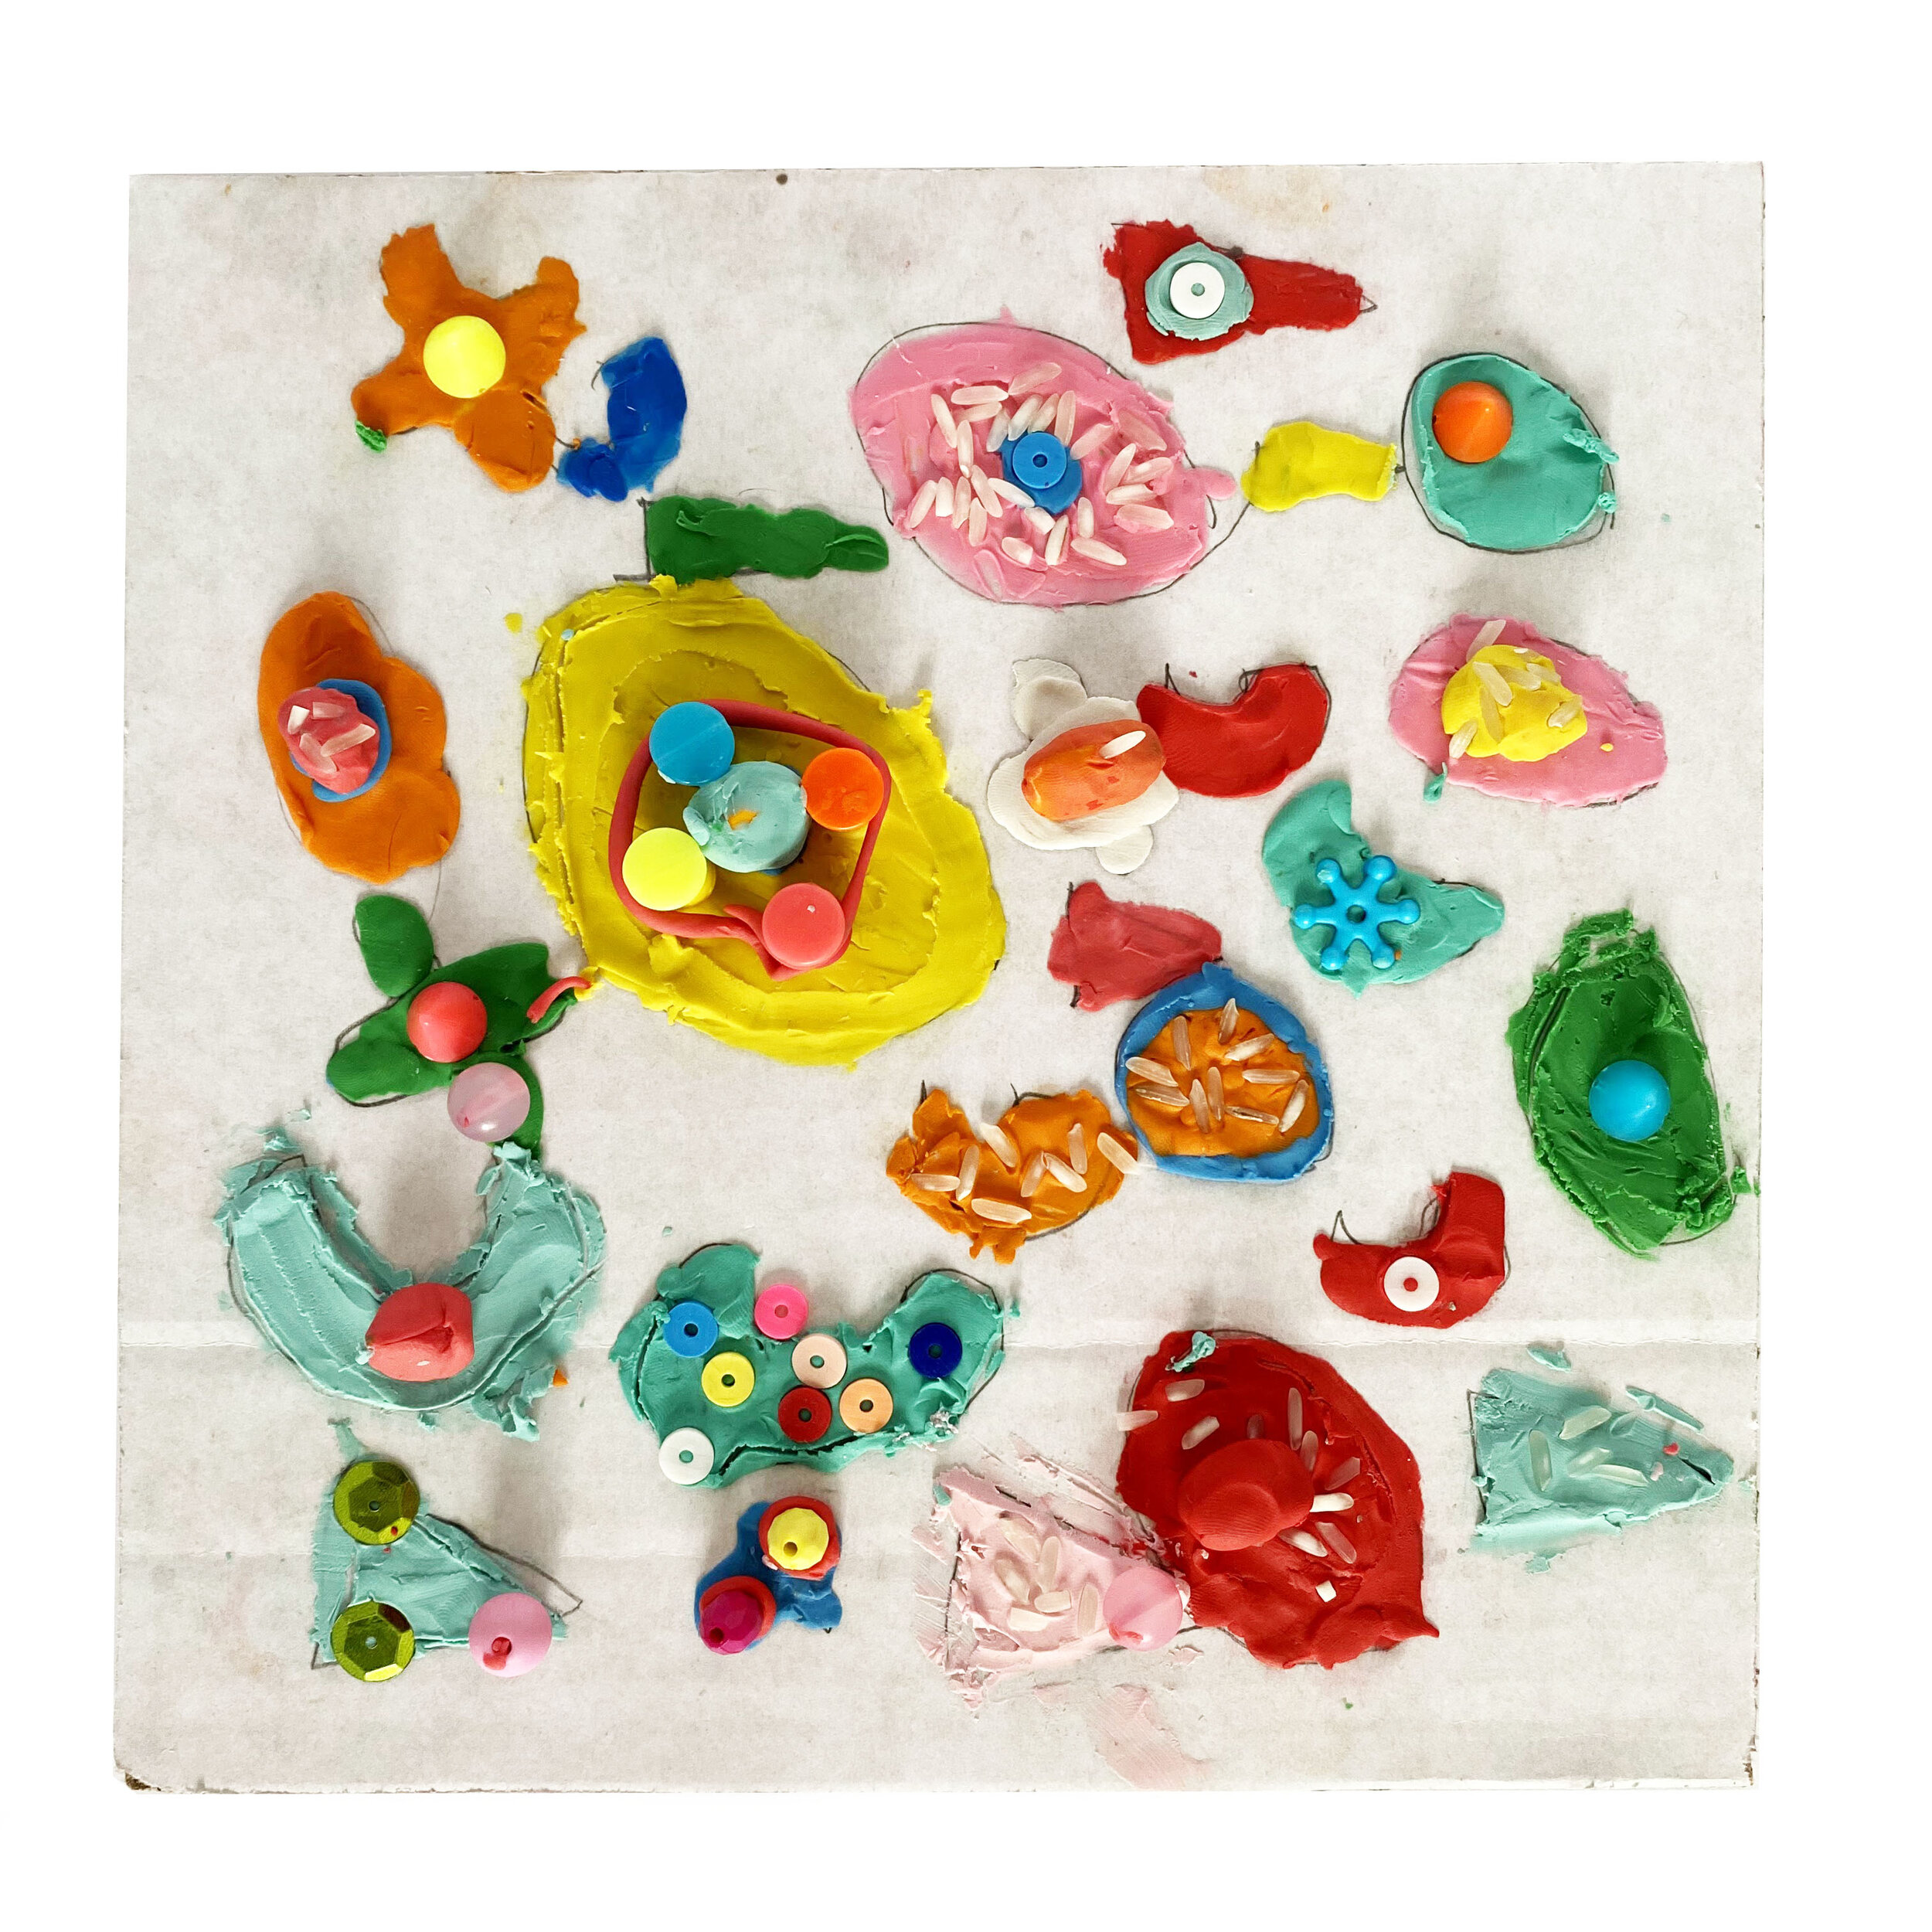 Abstract Clay Project for Kids inspired by artist Liz Payne — ART CAMP